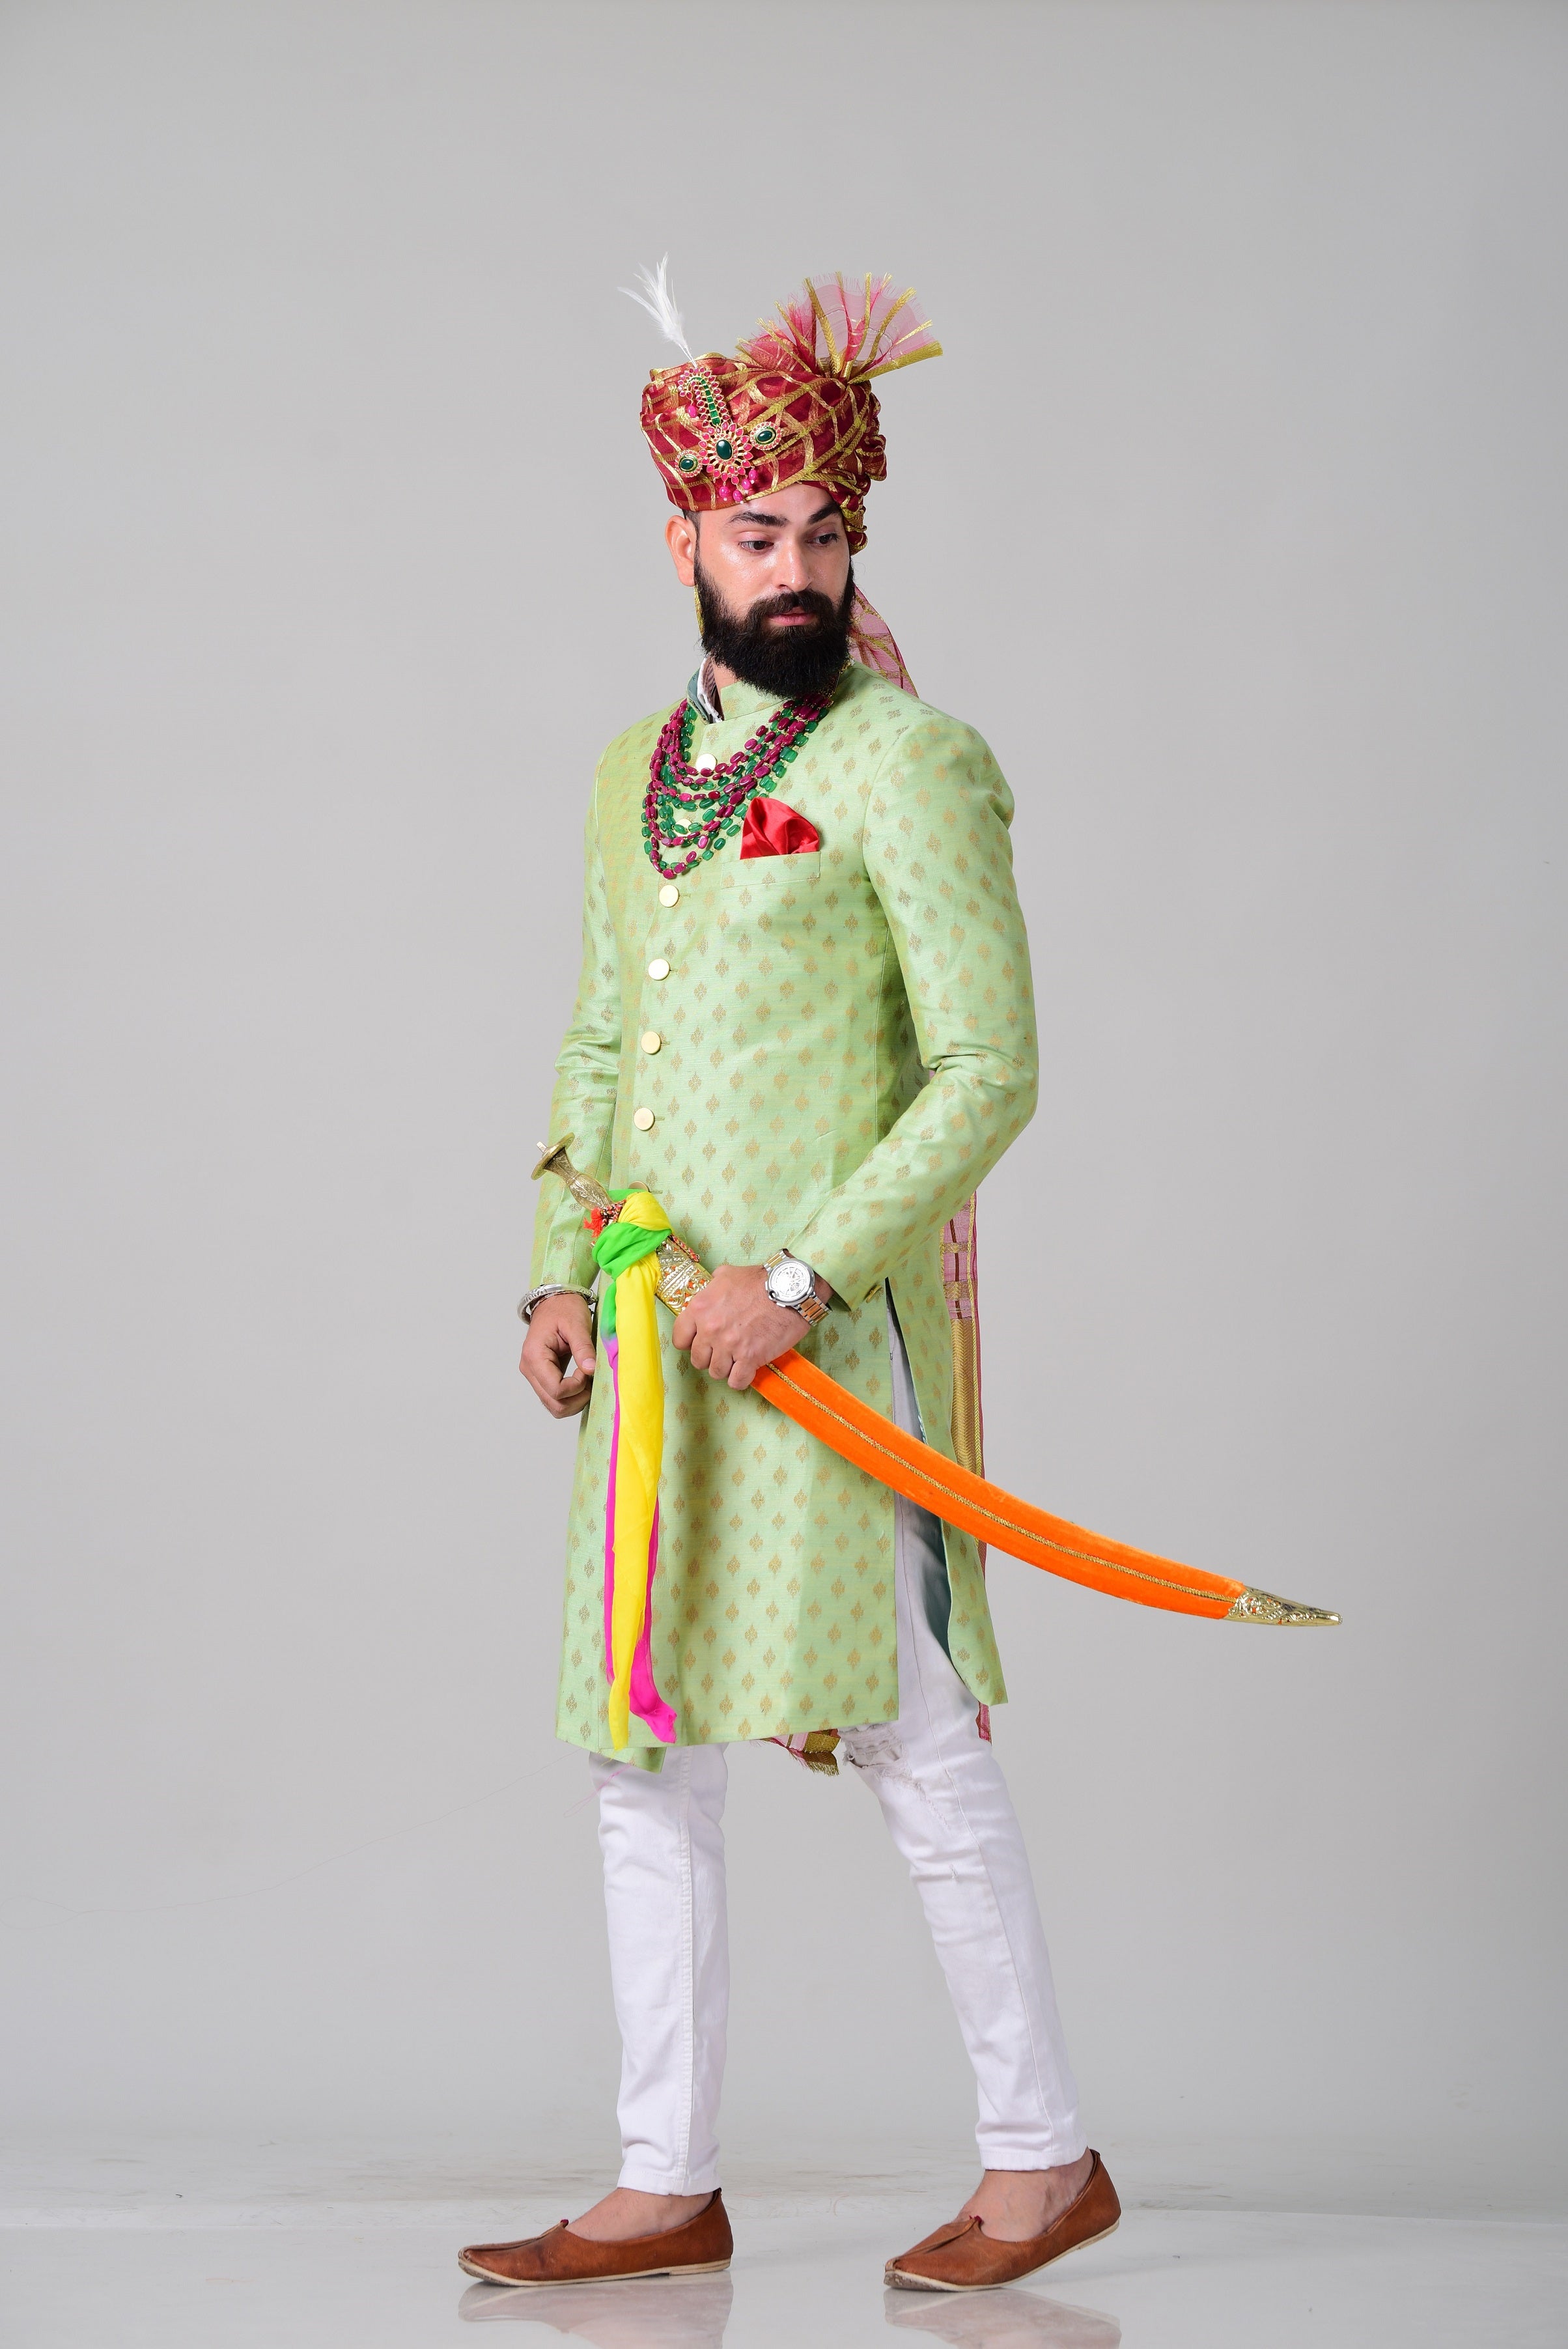 Royal Lime Green Self Embroidered Brocade Silk Sherwani/Achkan for Men | Indian Formal Kurta Style wear | Perfect for Family Weddings & Grooms